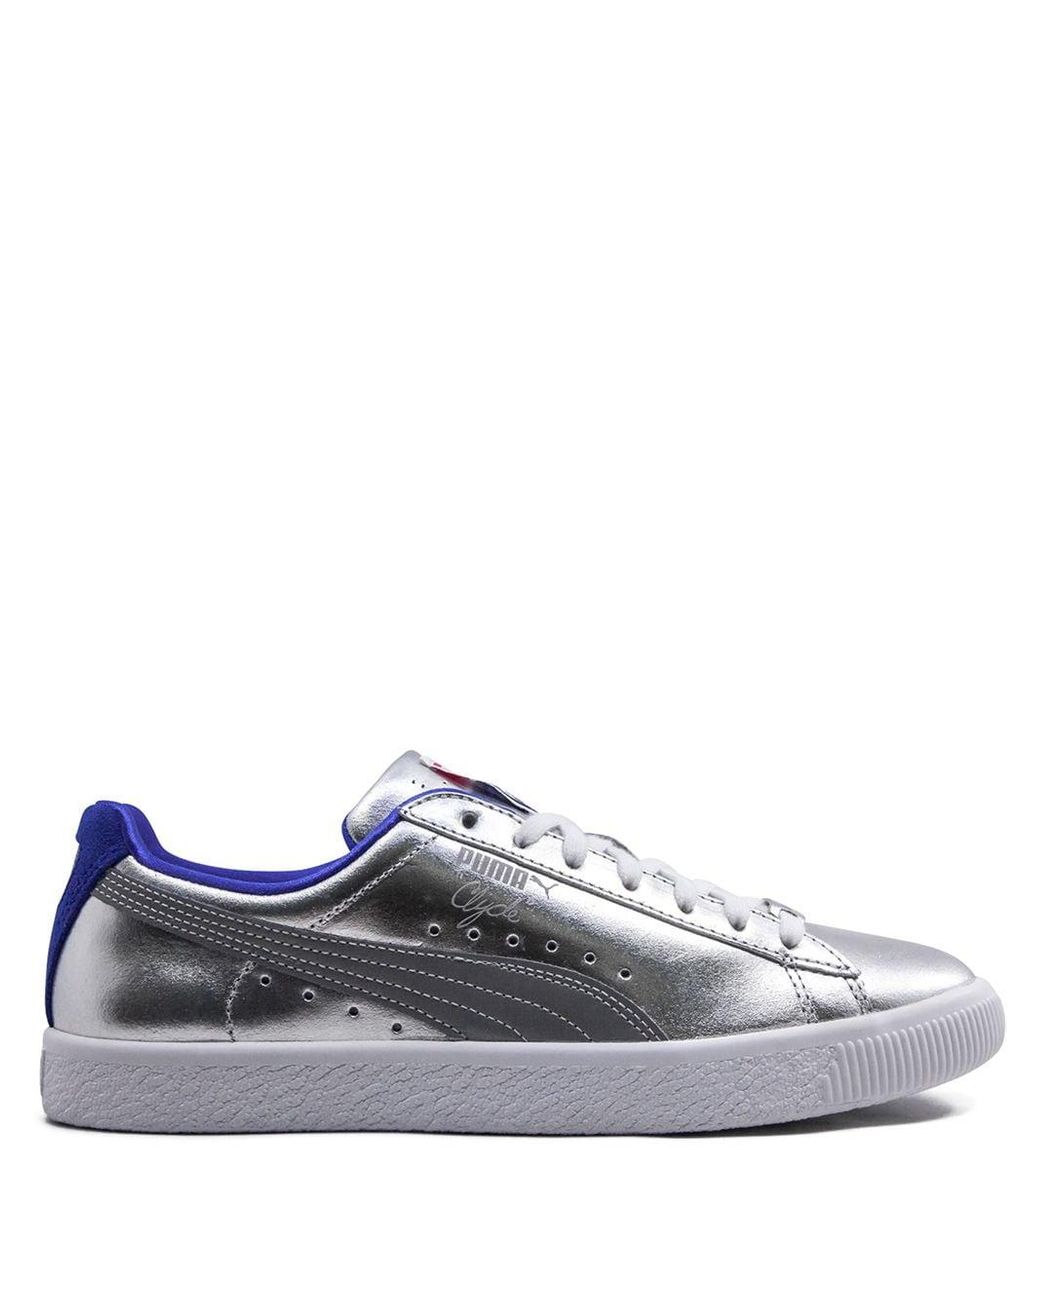 PUMA X Le X Jahan Loh Clyde Future Past Le Sneakers in Metallic for Men |  Lyst